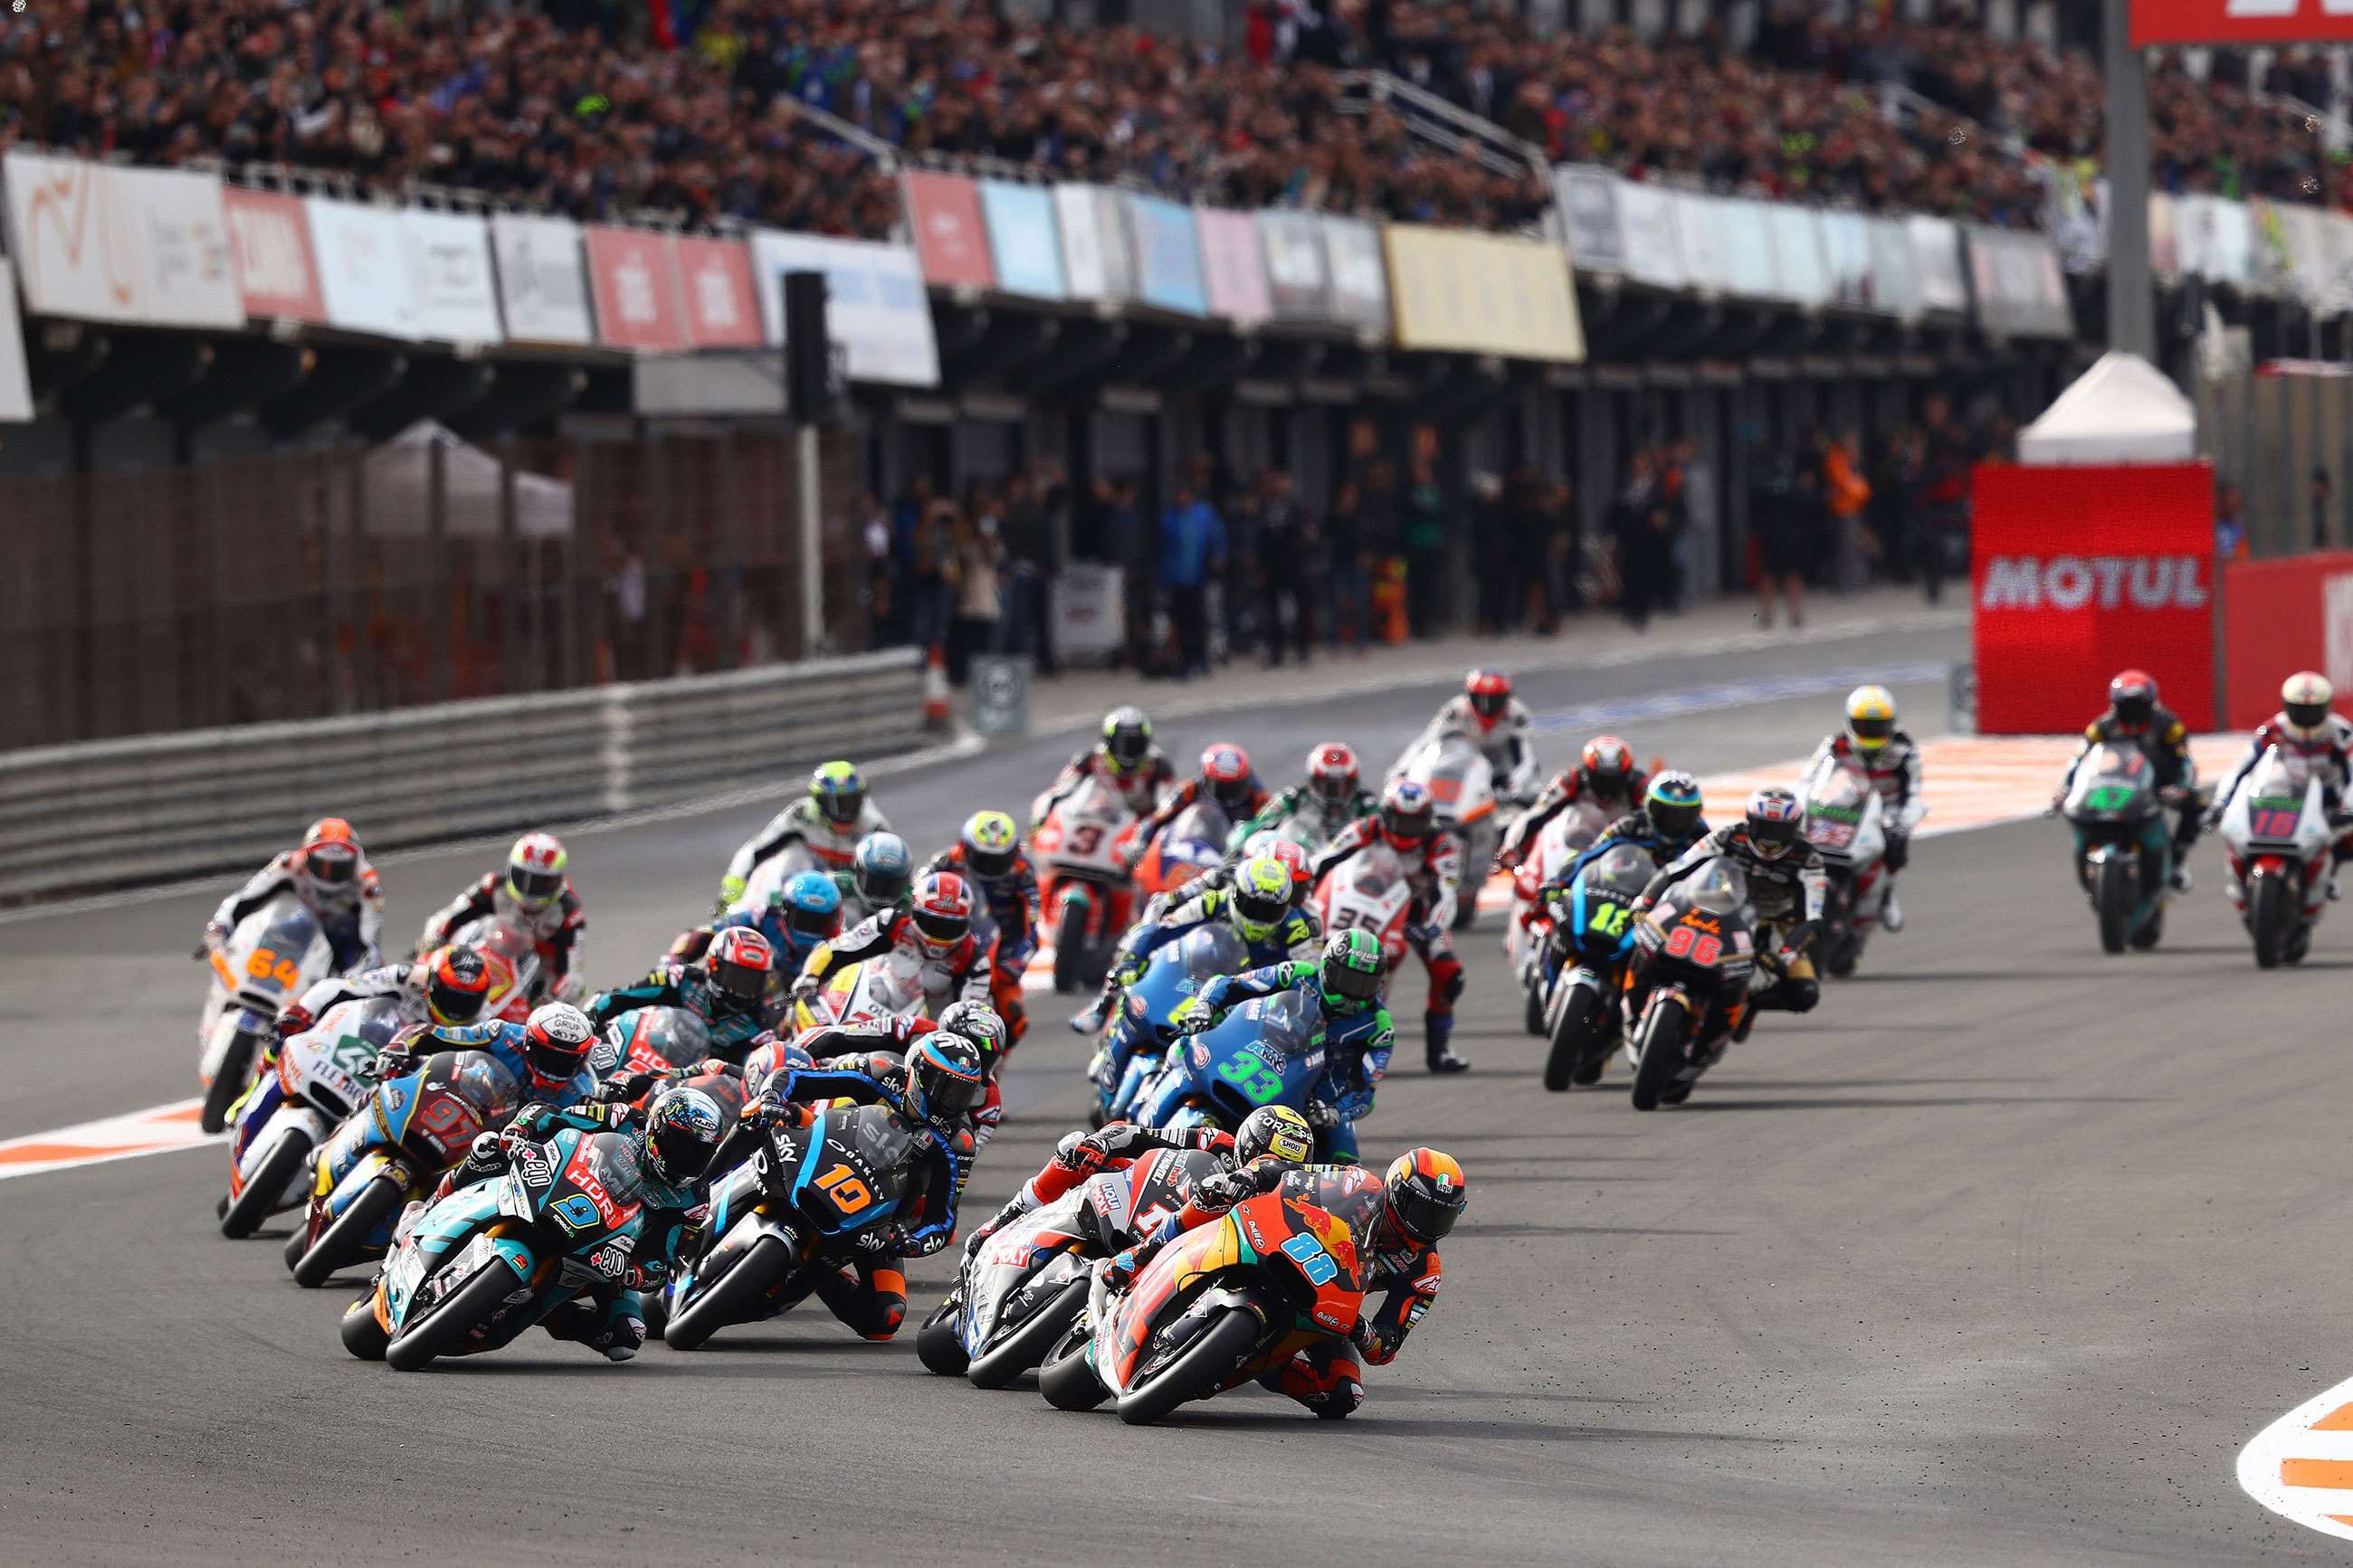 moto2-2020-preview-valencia-19-gold-and-goose-mi-goodwood-13072020.jpg